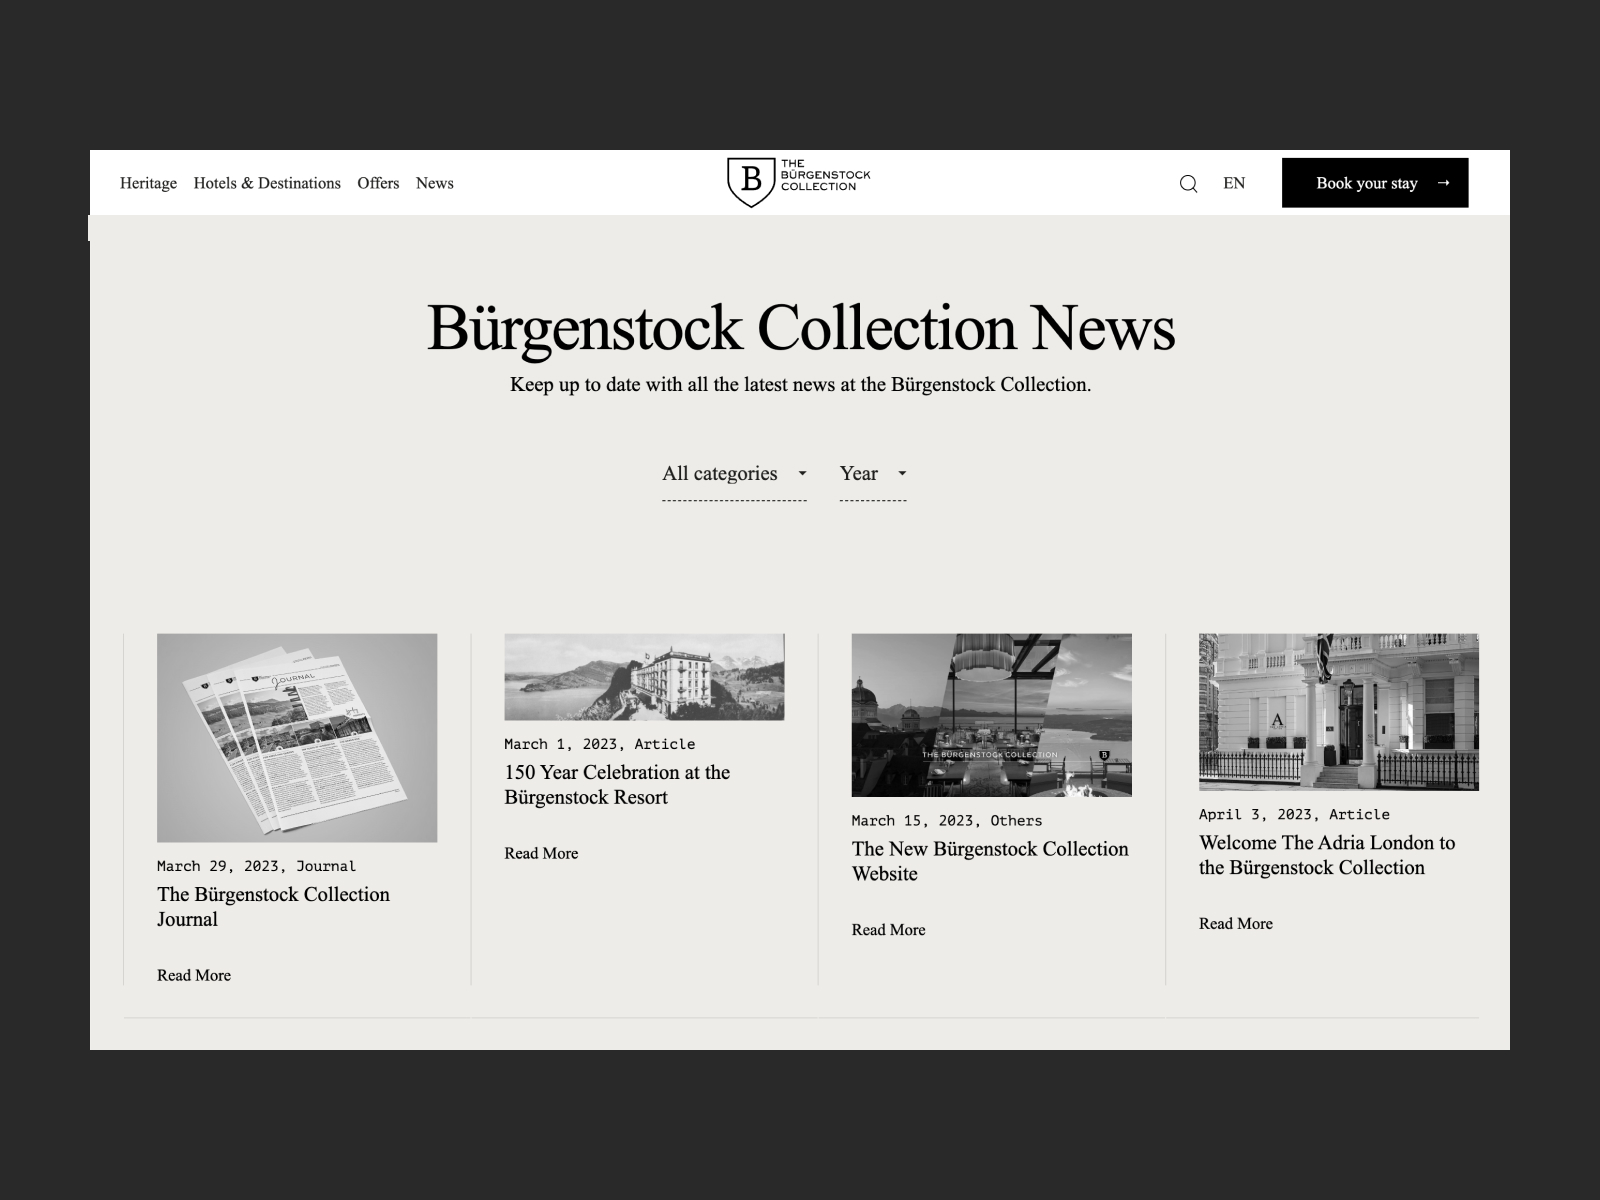 BURGENSTOCK COLLECTION NEWS SECTION